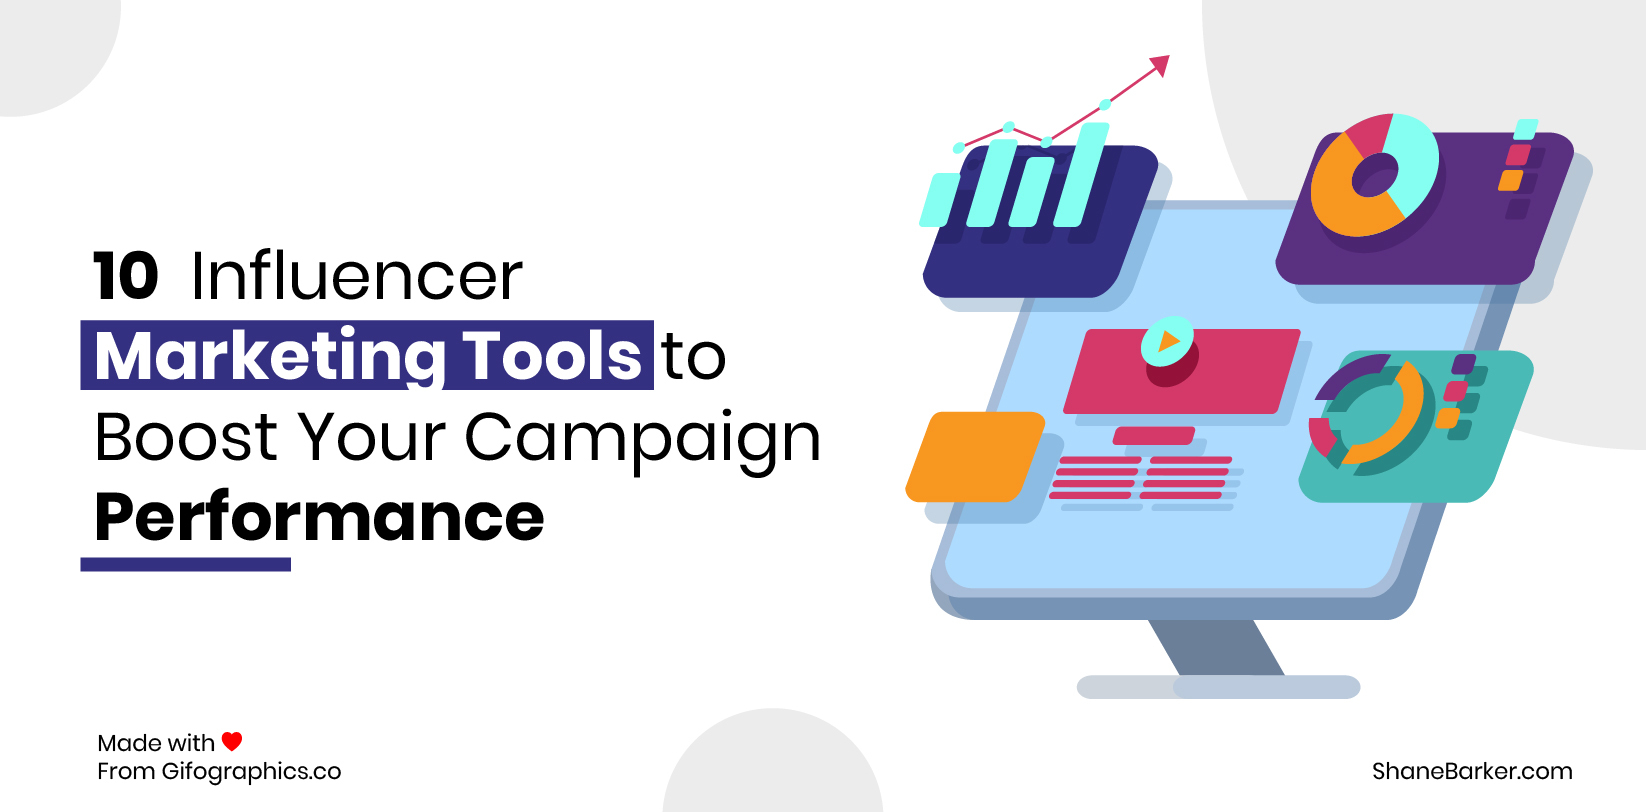 10 Influencer Marketing Tools to Boost Your Campaign Performance in 2020